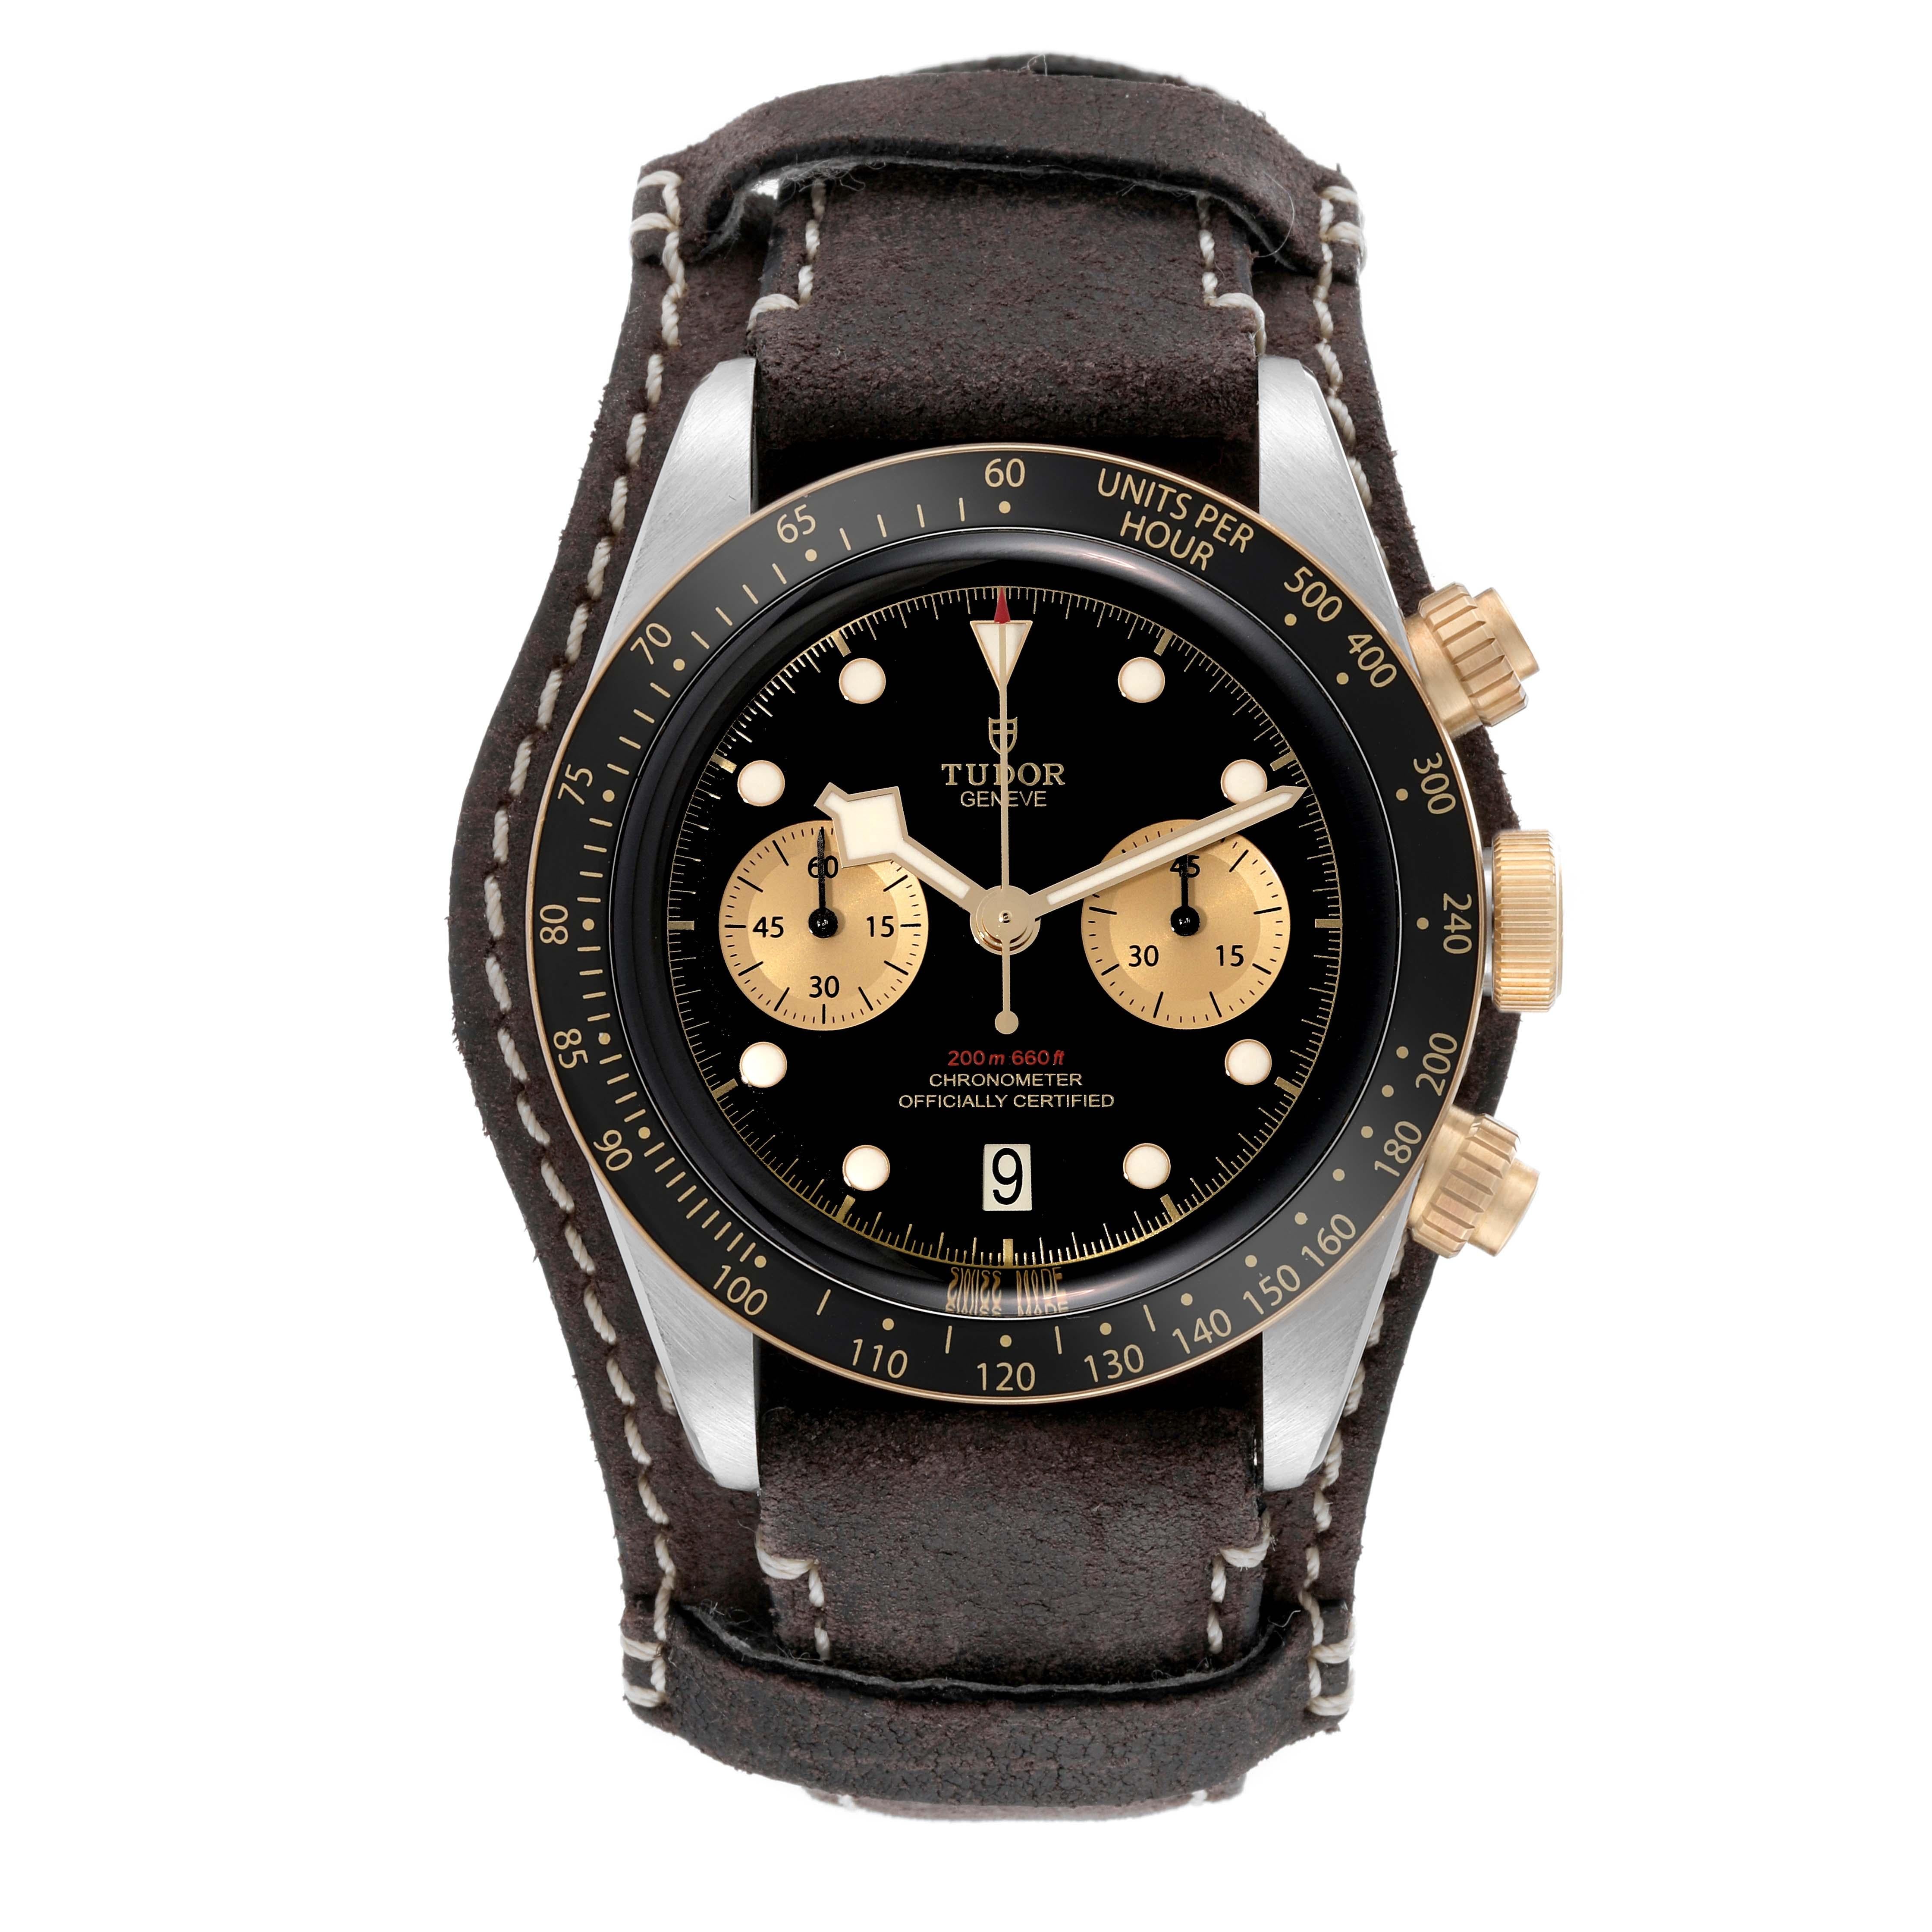 Tudor Heritage Black Bay Steel Yellow Gold Mens Watch 79363 Box Card. Automatic self-winding movement. Stainless steel and 18k yellow gold oyster case 41 mm in diameter. Tudor logo on crown. 18k yellow gold bezel with a black anodised aluminium ring